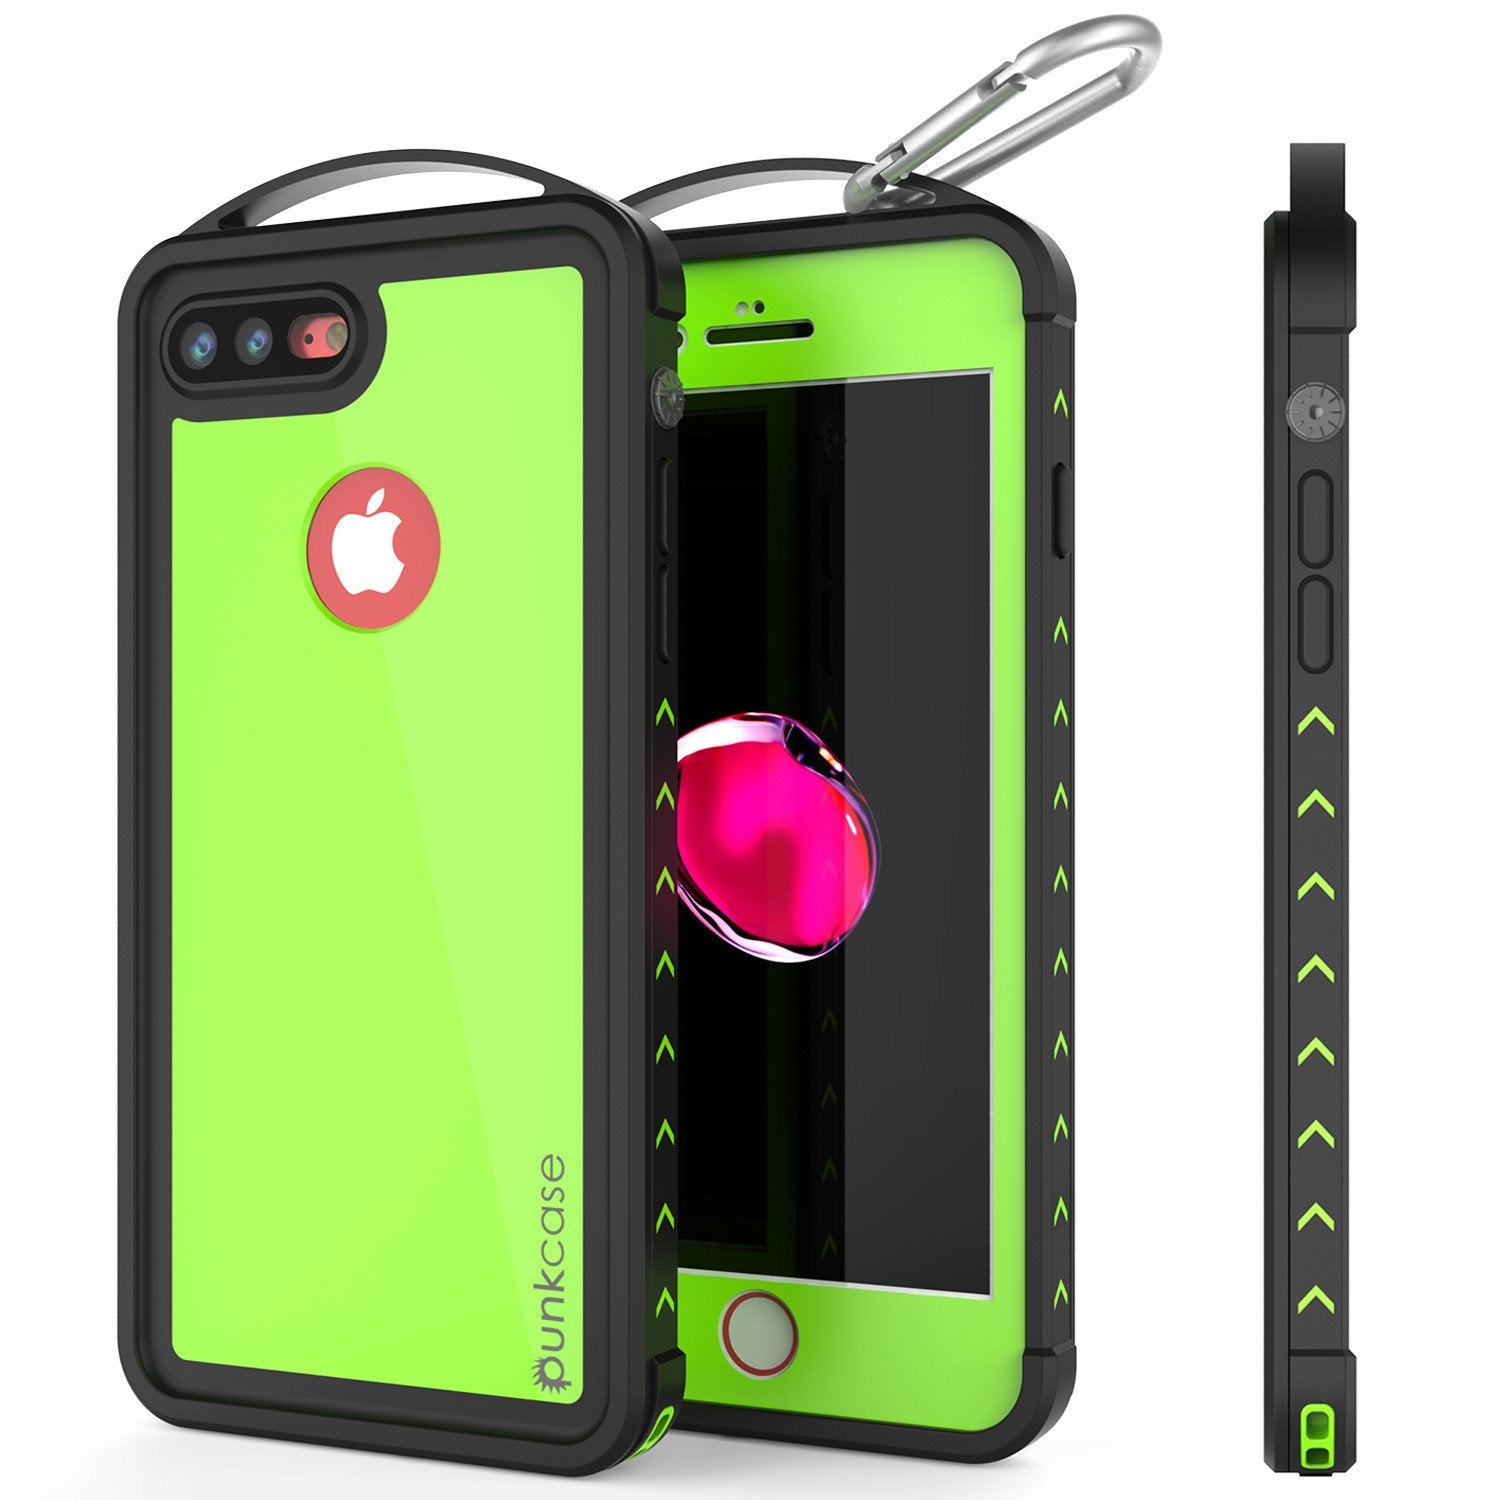 iPhone 7+ Plus Waterproof Case, Punkcase ALPINE Series, Light Green | Heavy Duty Armor Cover (Color in image: light green)